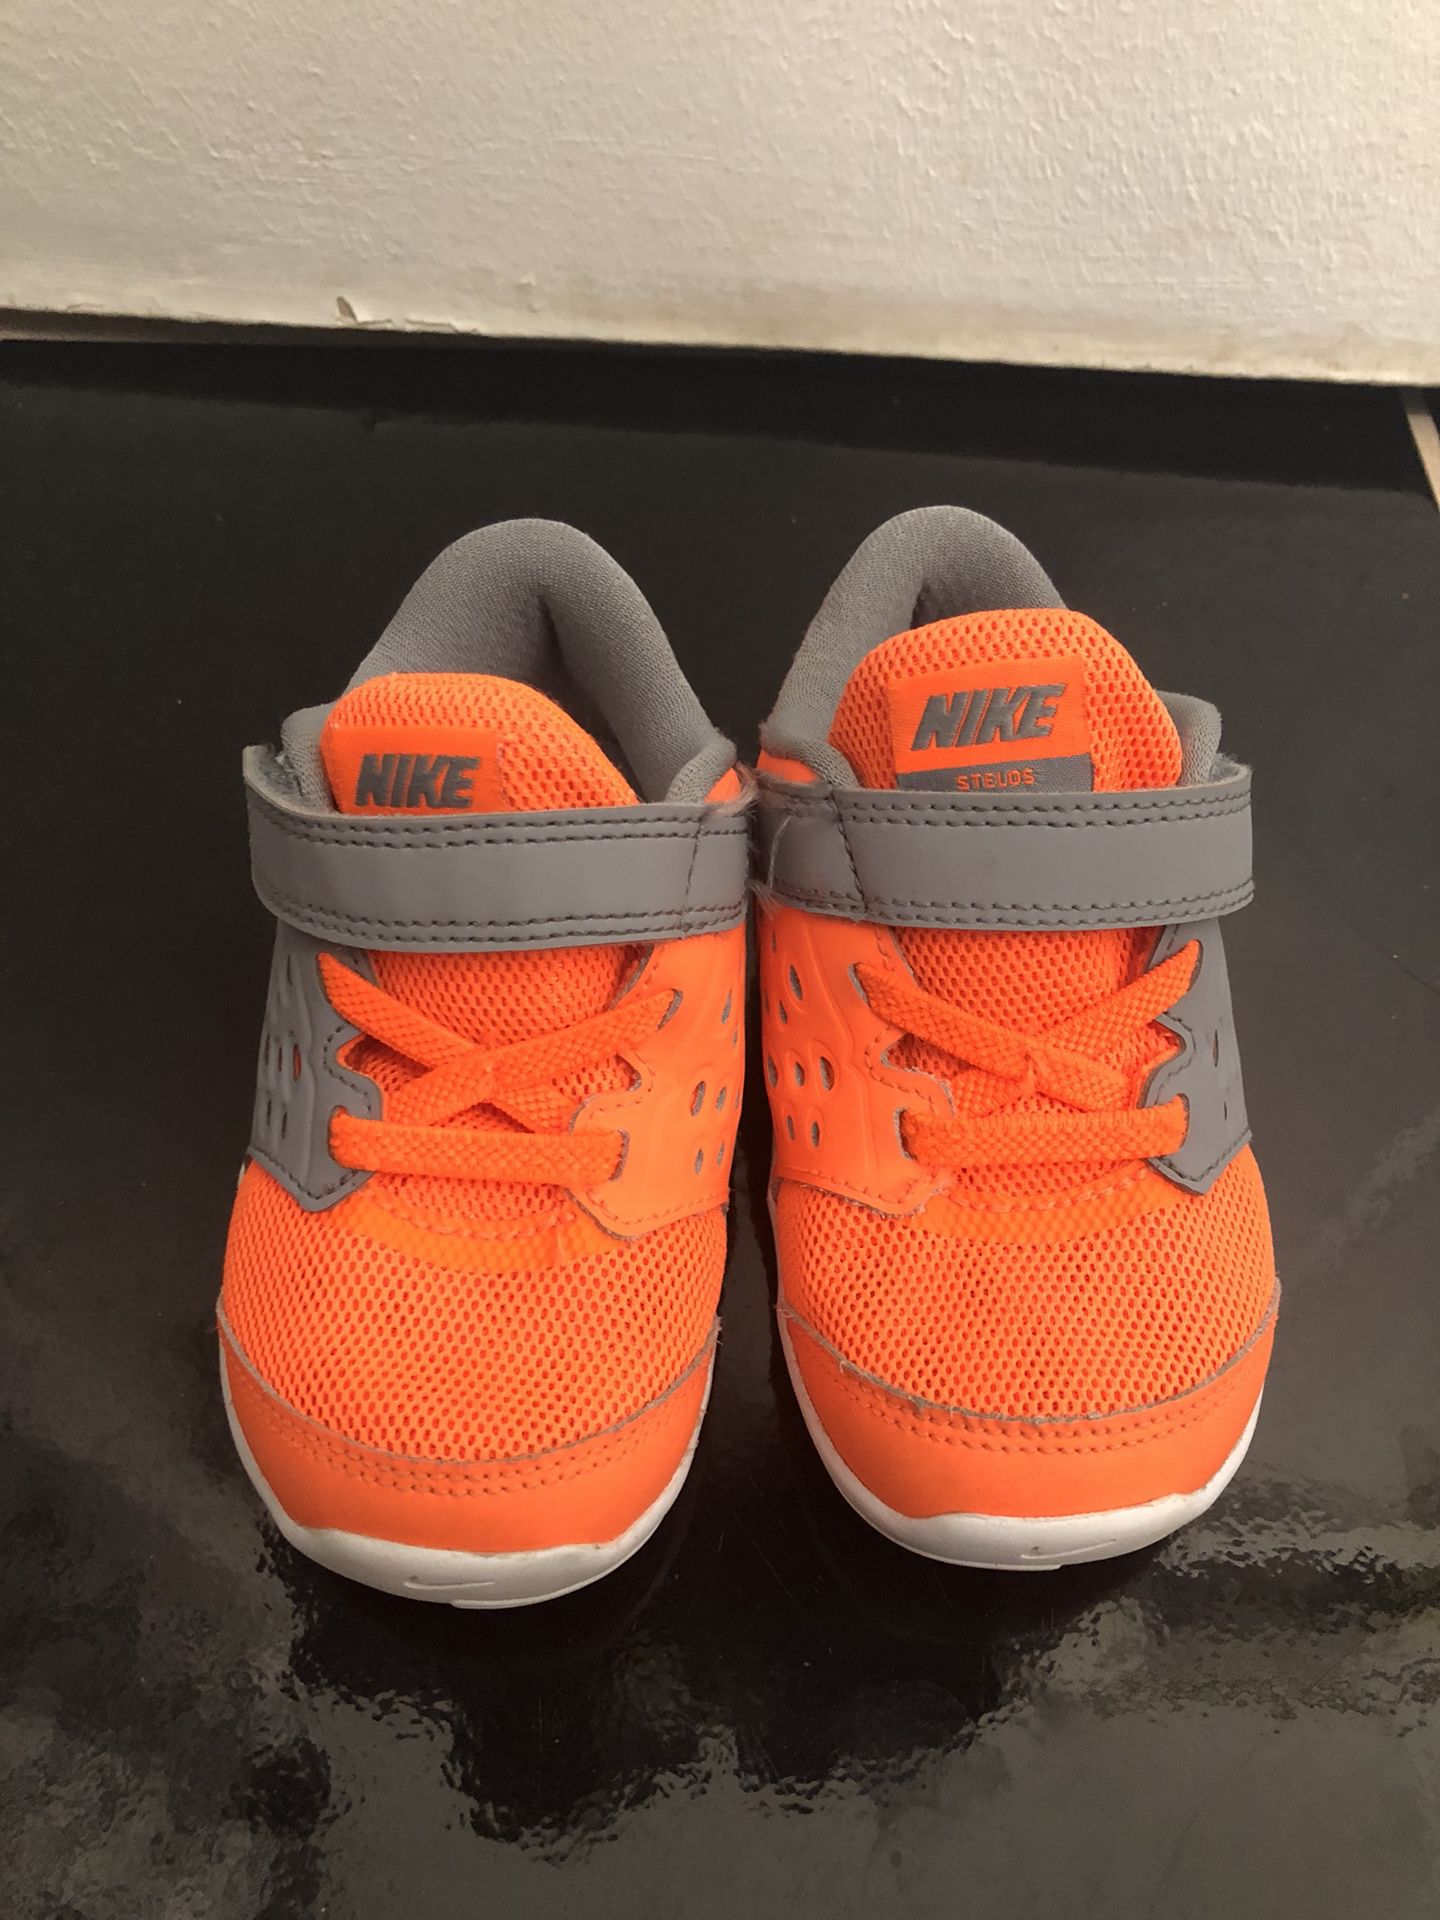 Nike Size 7 Toddler Shoes